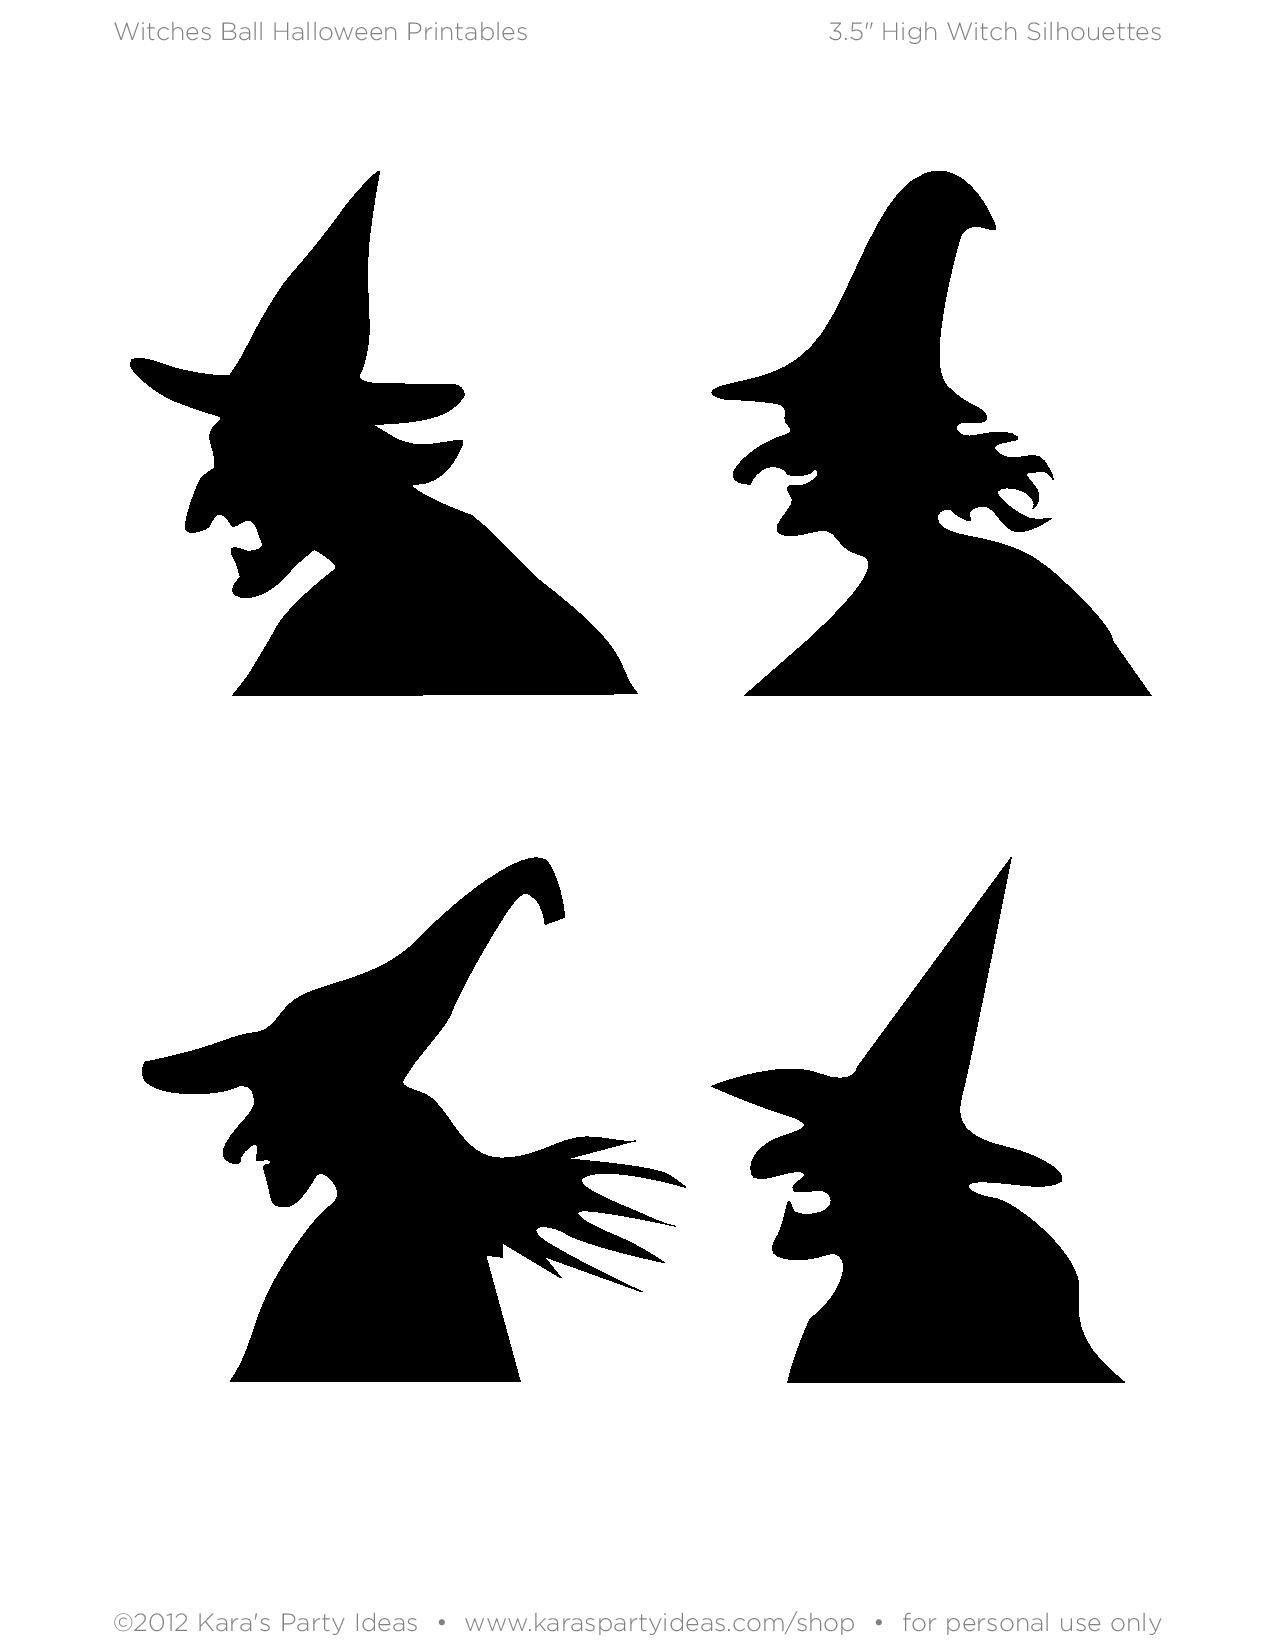 Halloween Witch Silhouette Printables | Halloween Ideas | Halloween - Free Halloween Silhouette Printables